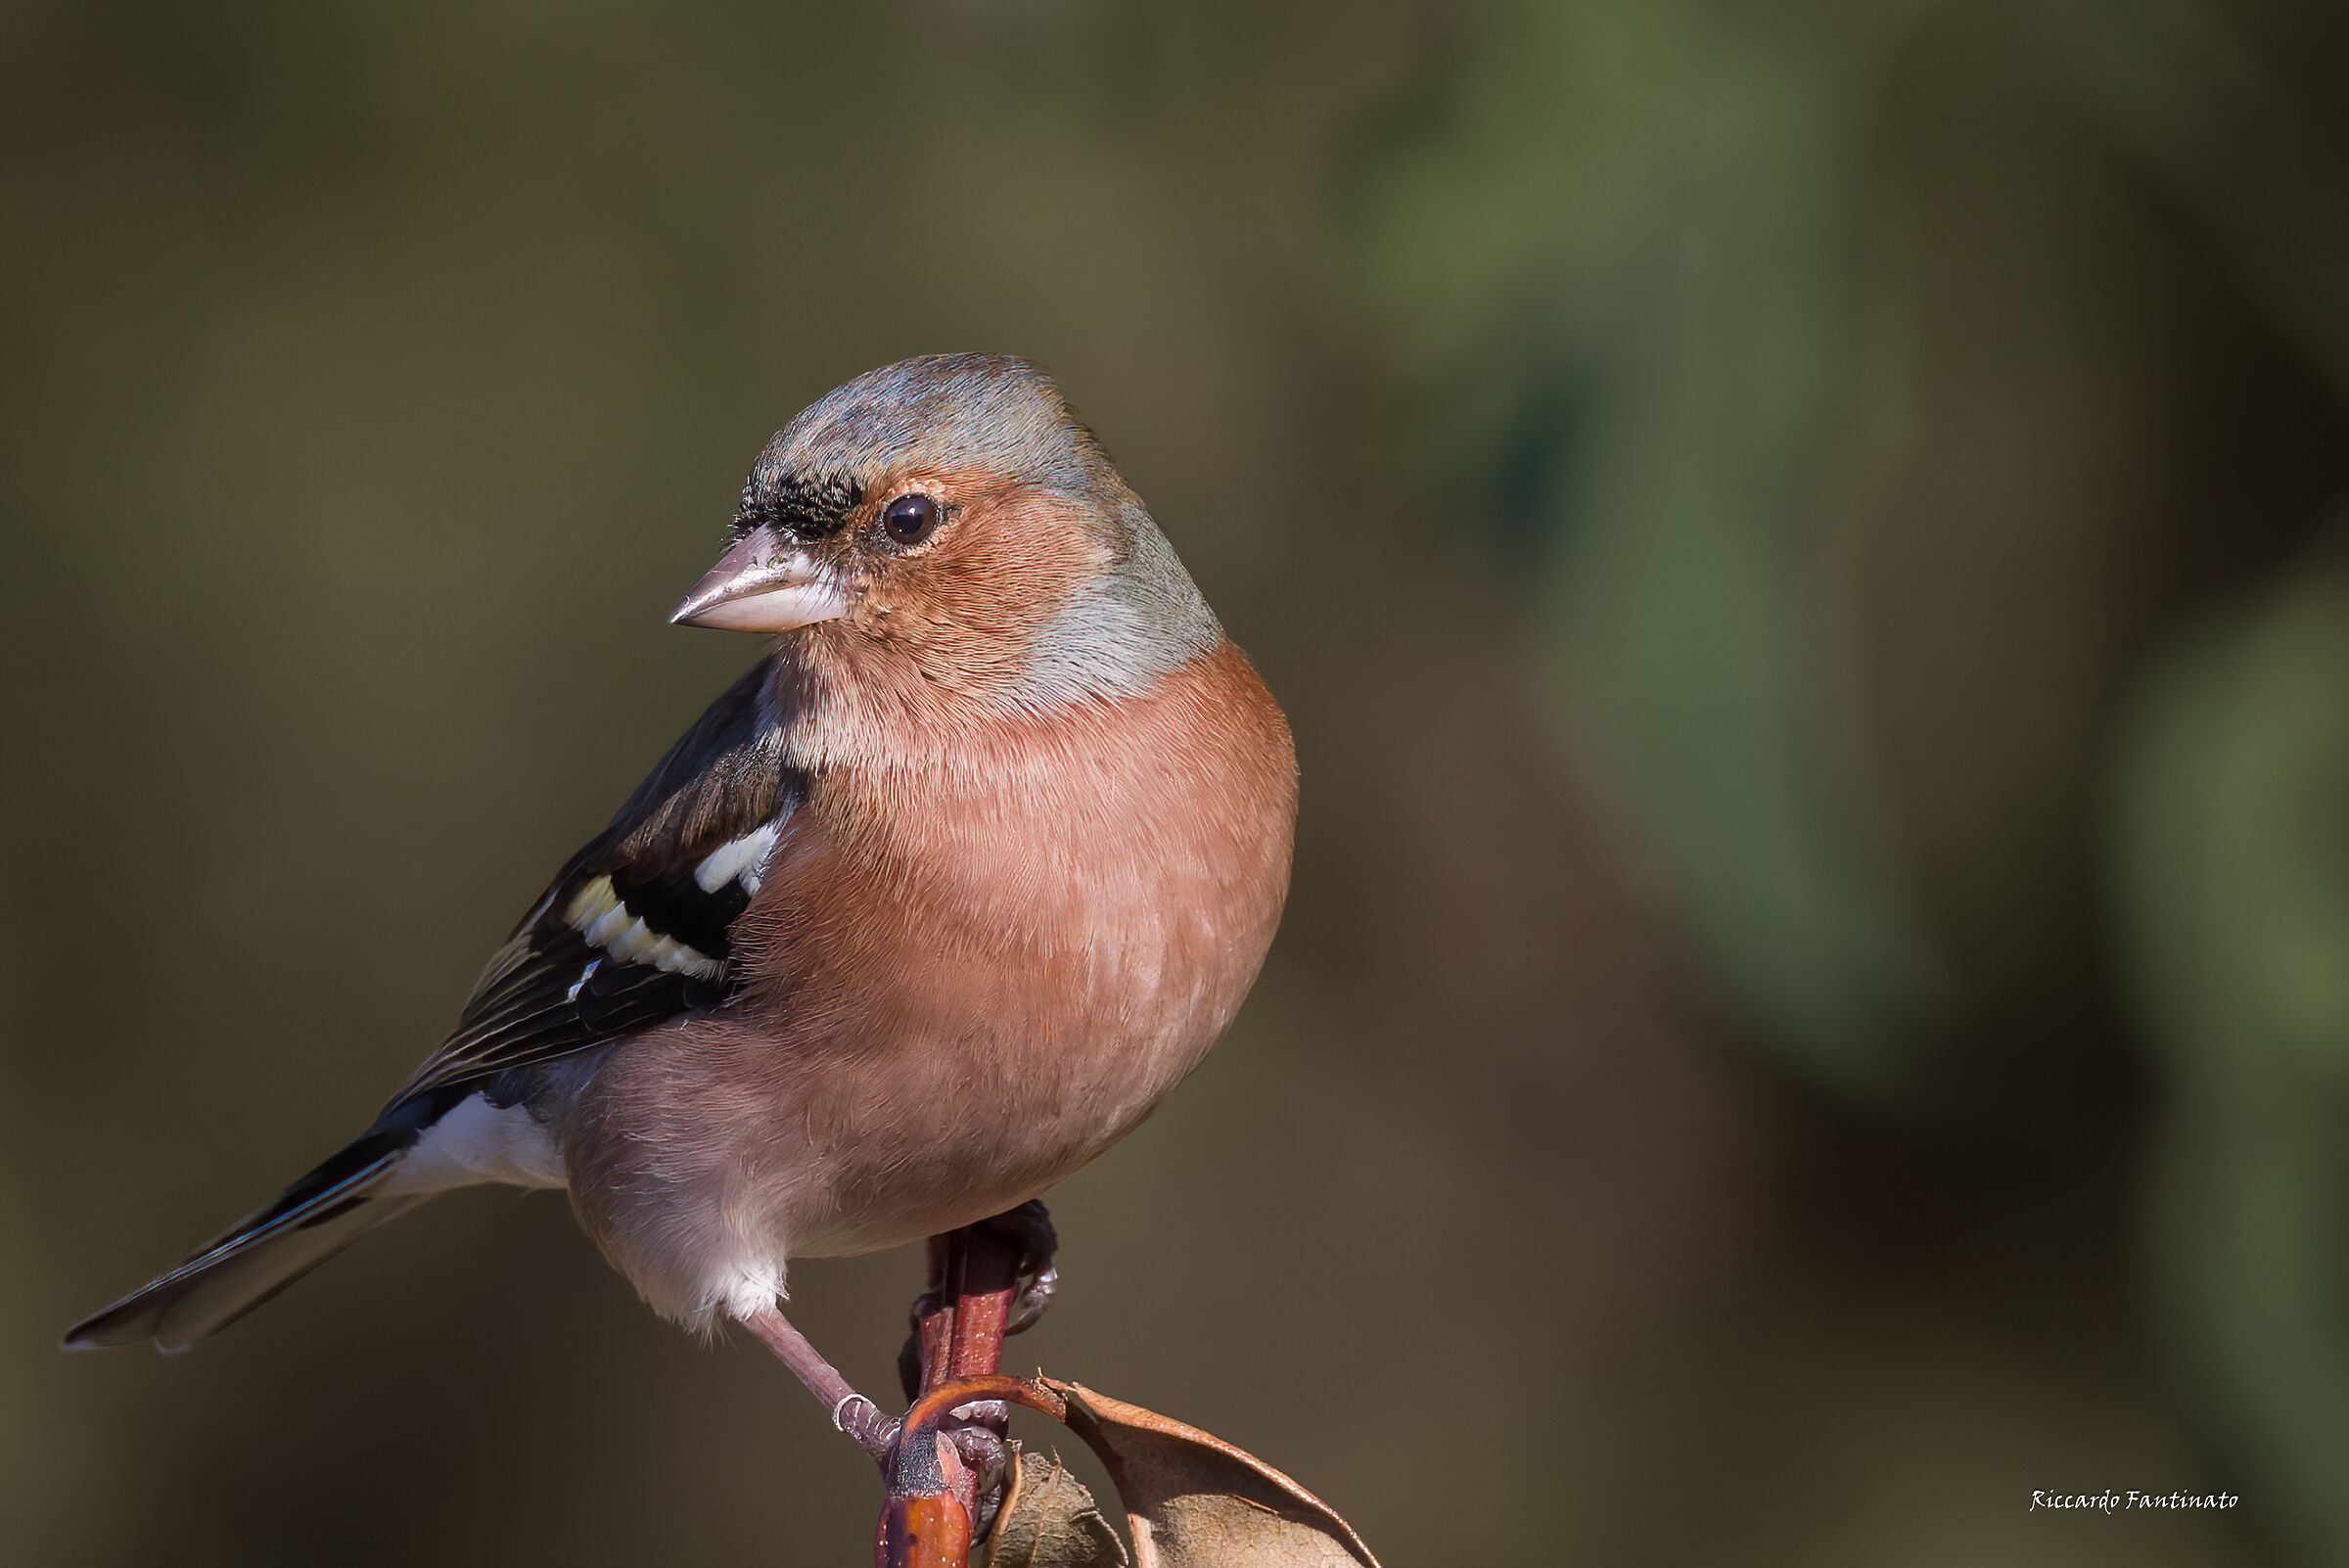 I'm really nice, I'm the Chaffinch :) ...